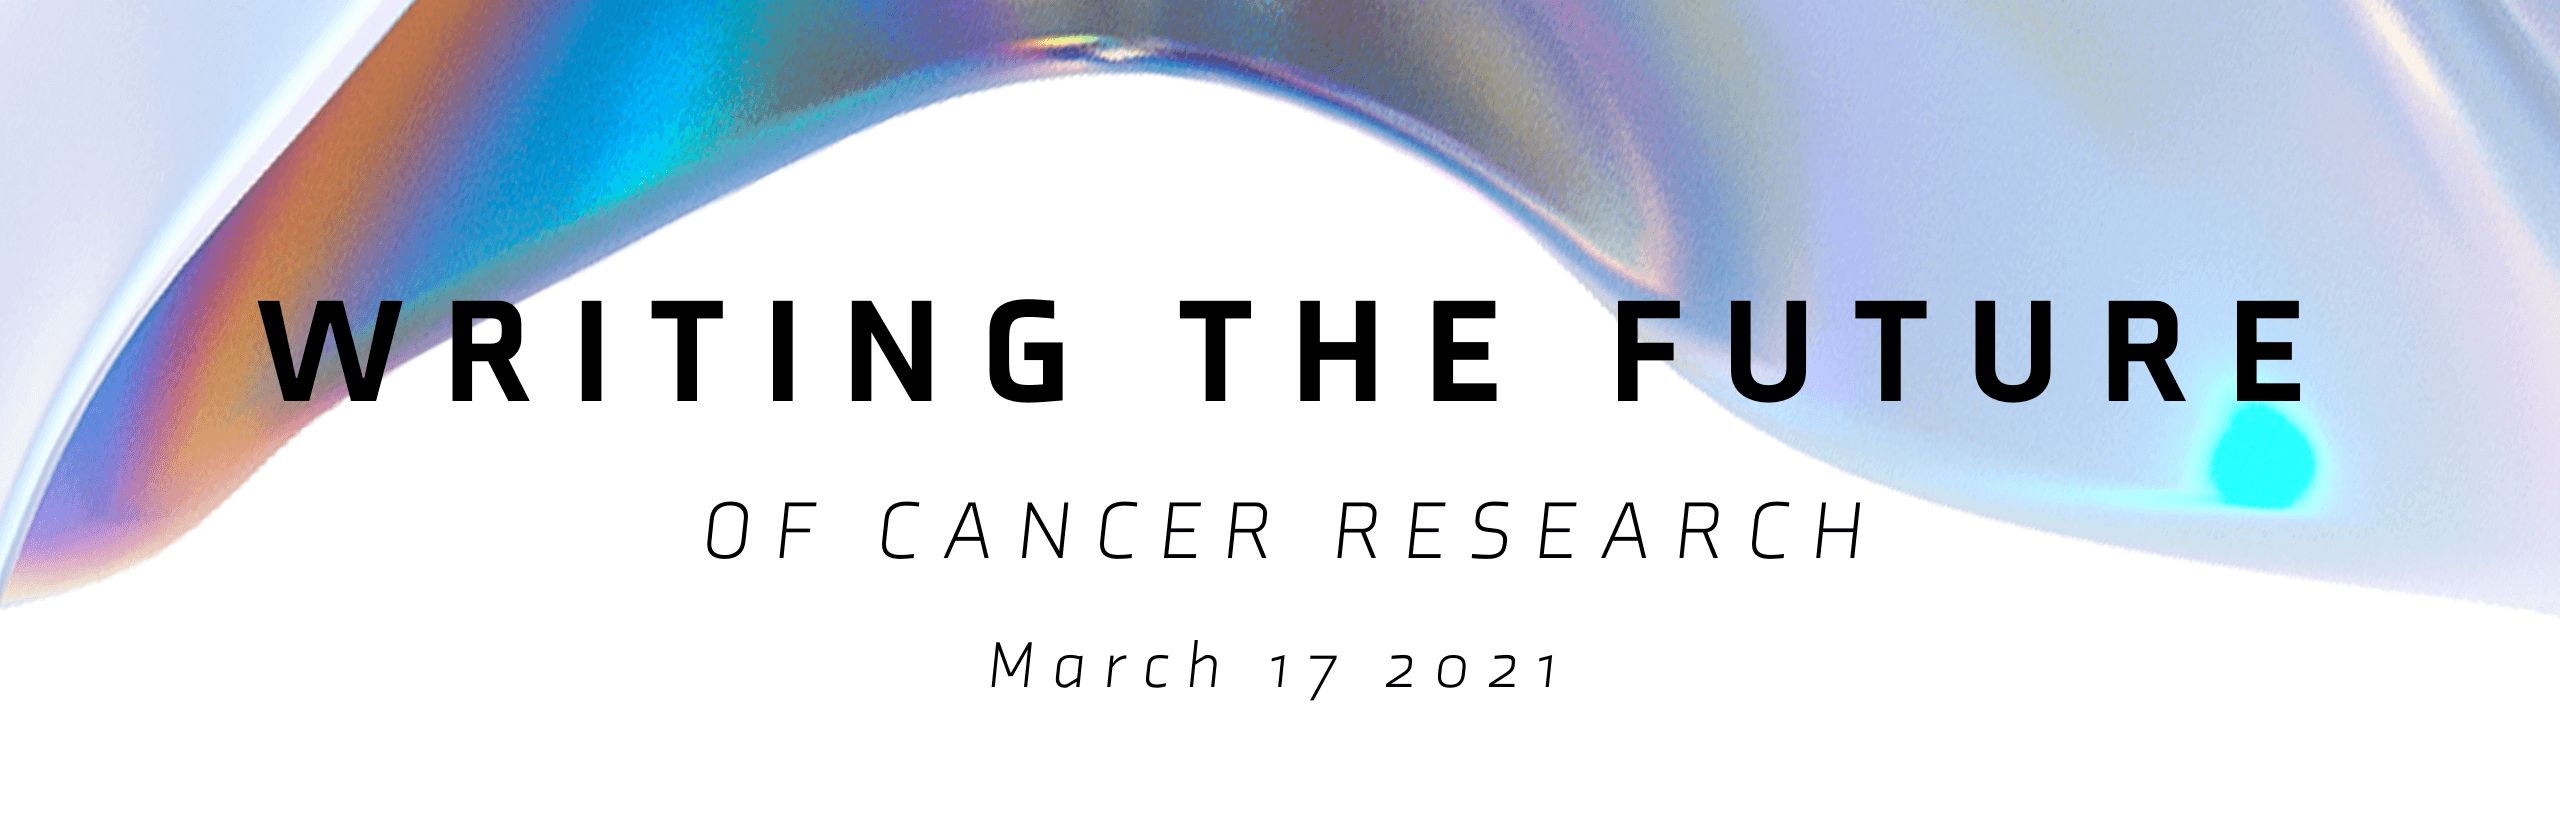 Live Symposium Preview: Writing the Future of Cancer Research